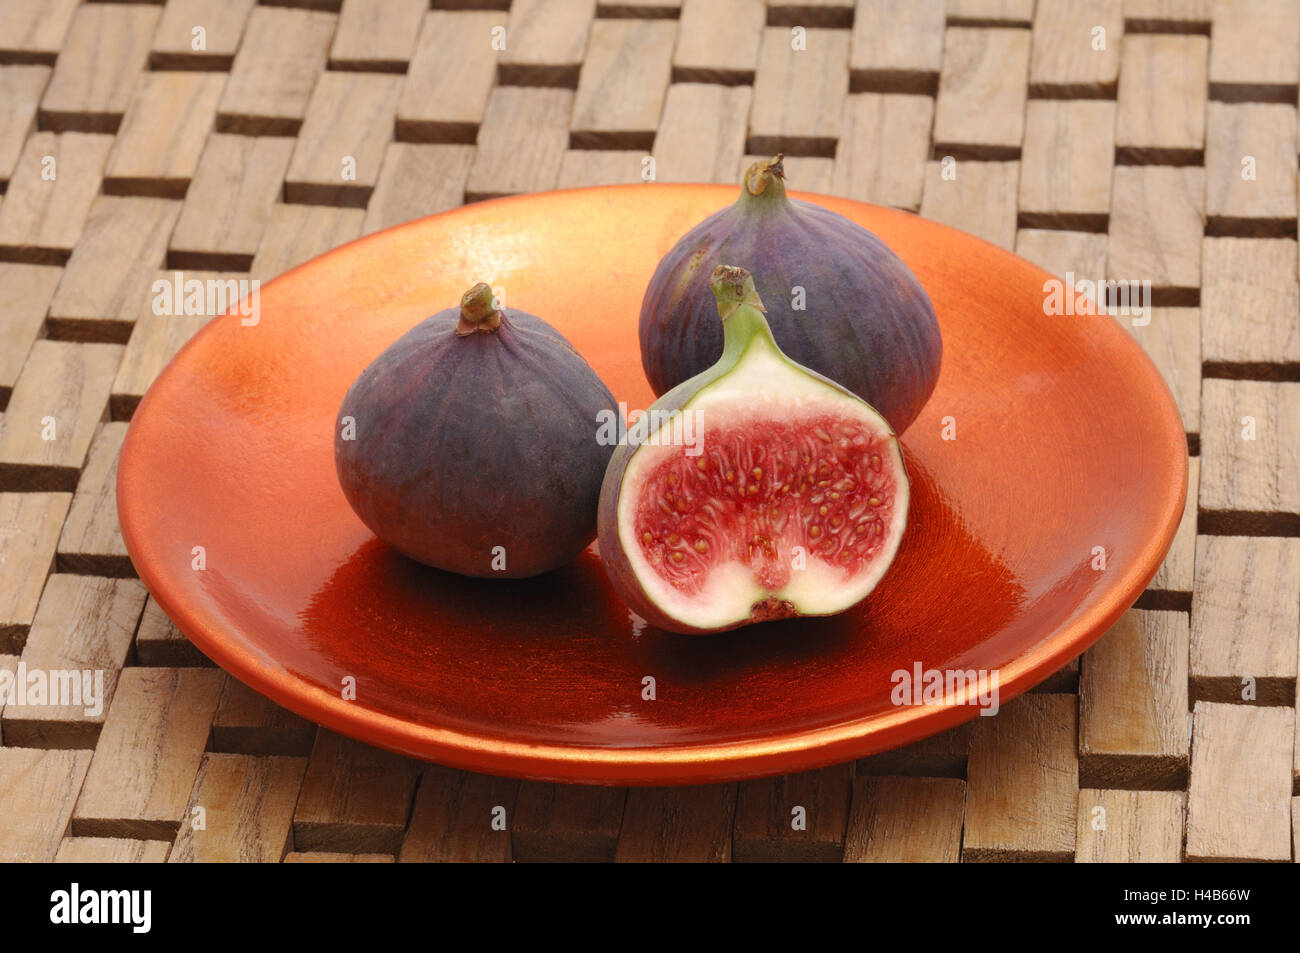 Figs, completely, halves, plate, Stock Photo